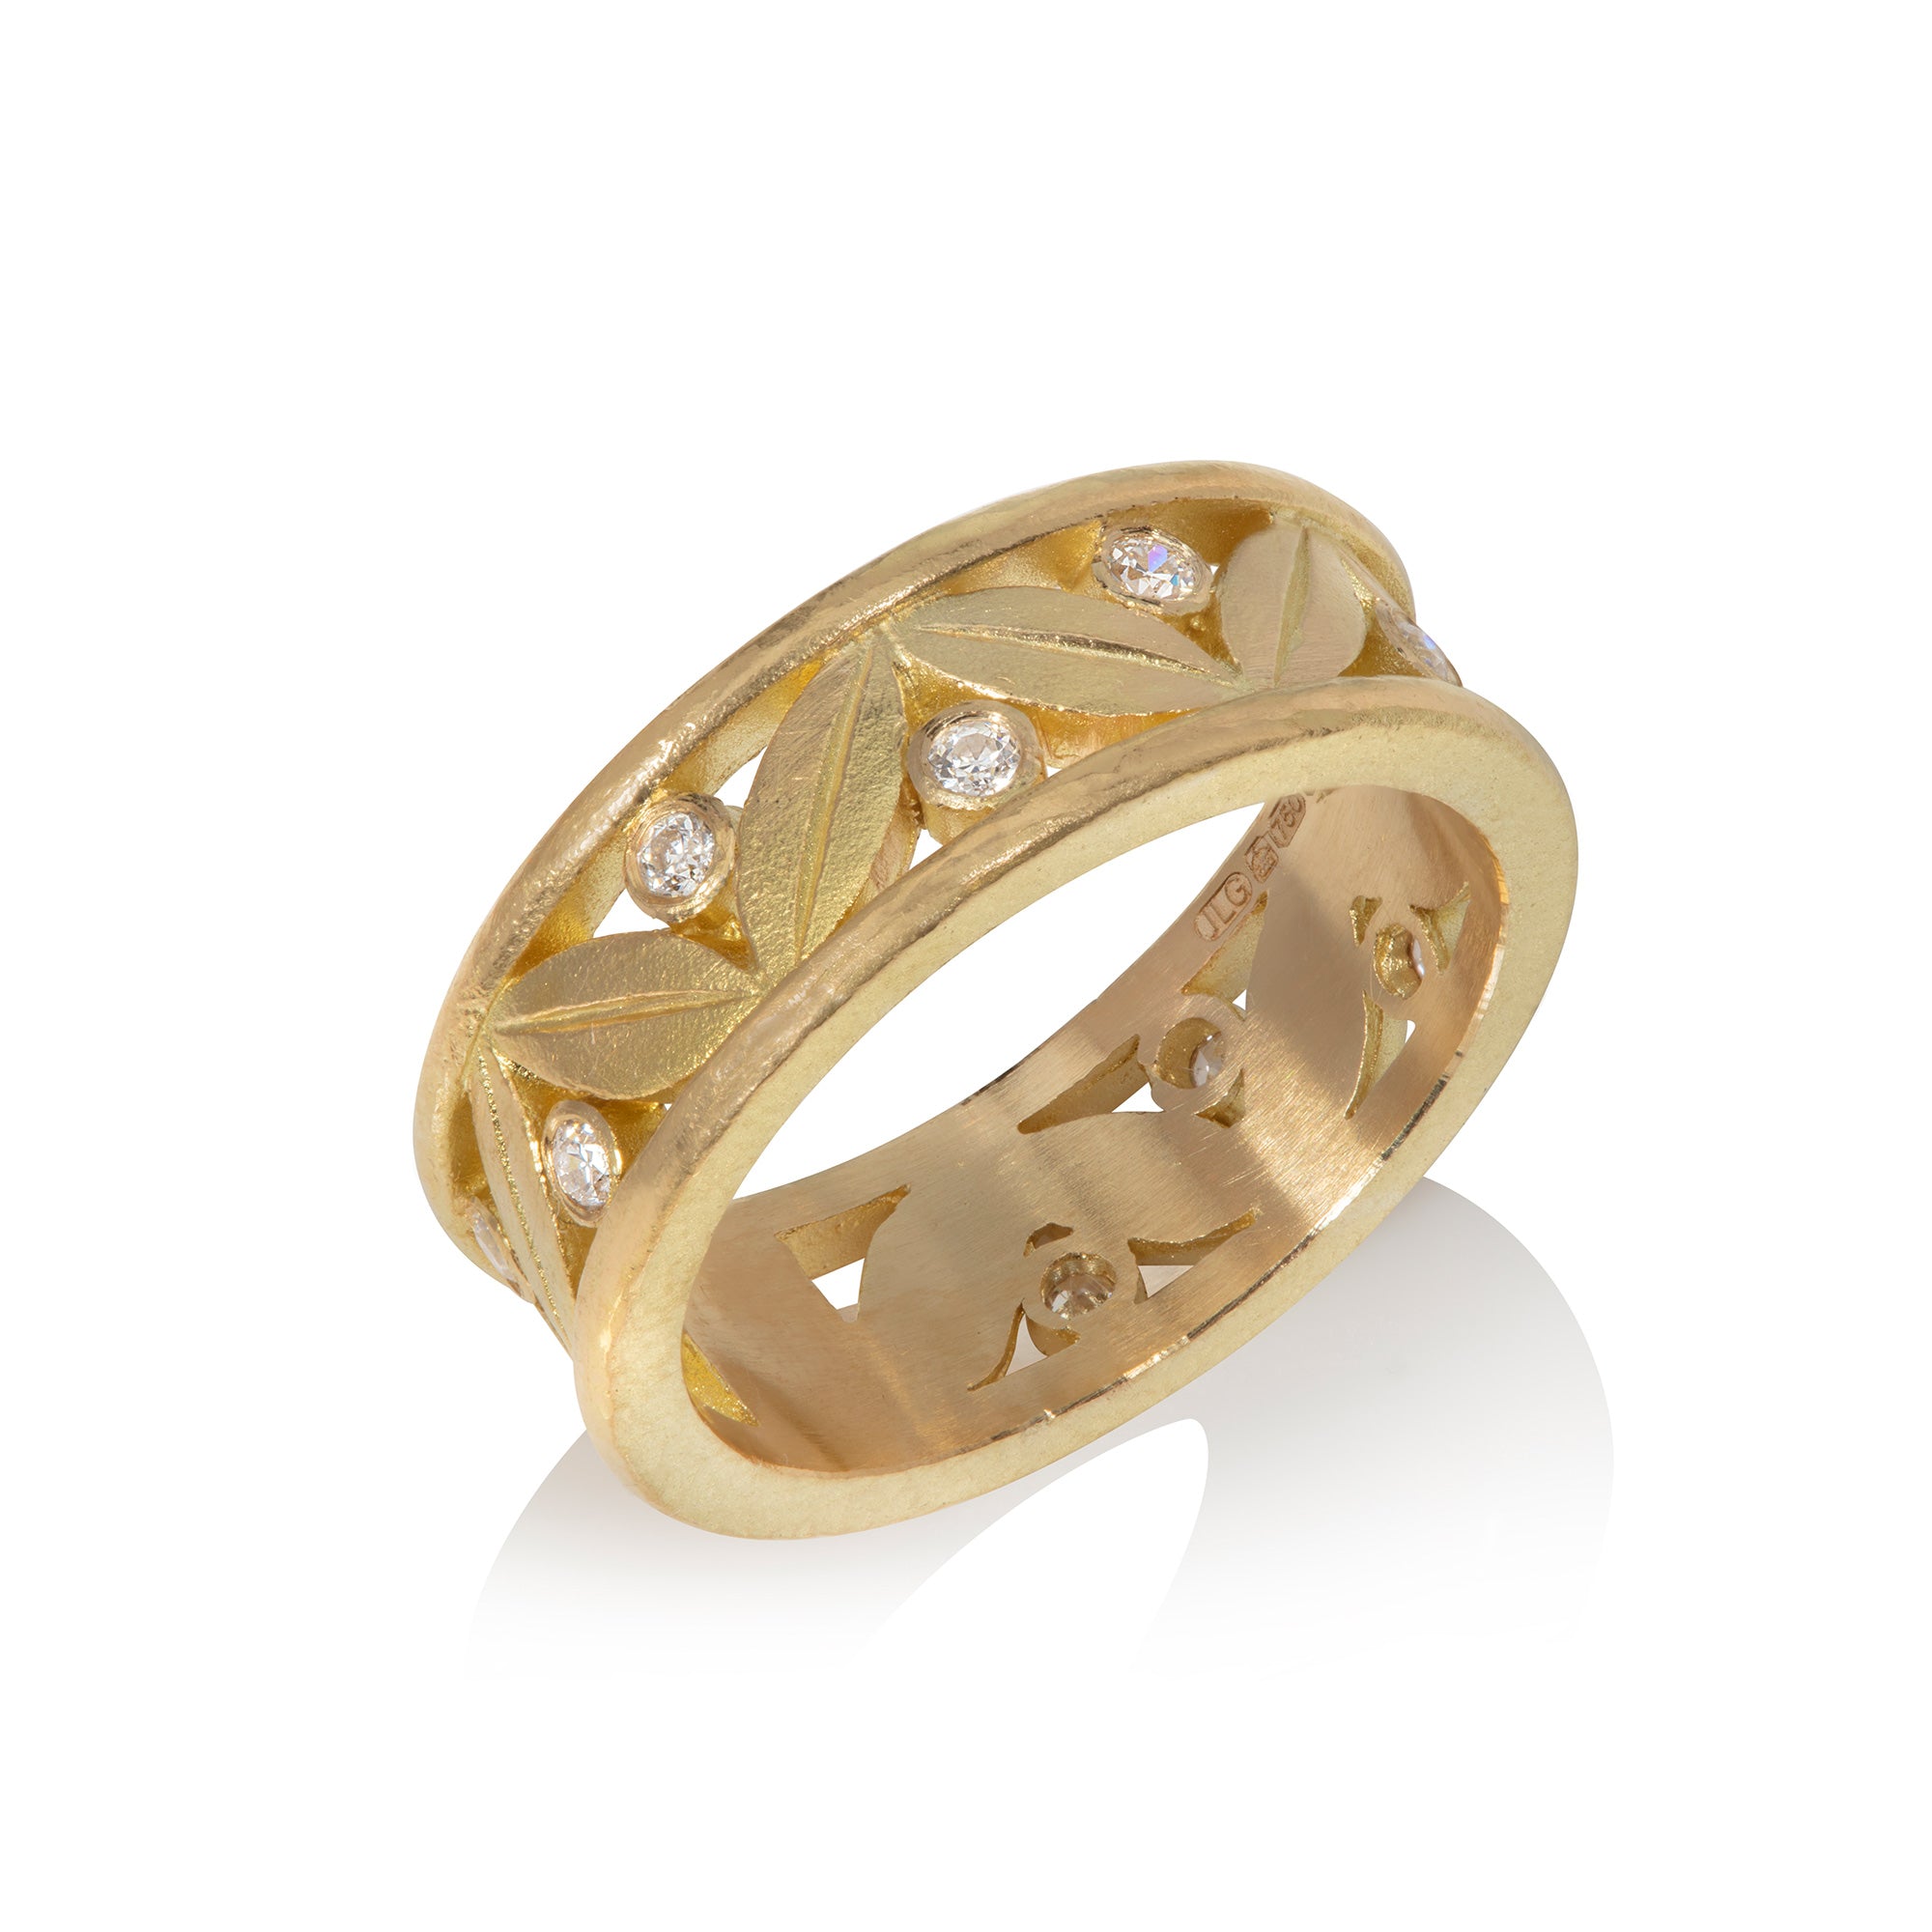 18ct yellow gold ring with leaf motif and diamonds on a white background